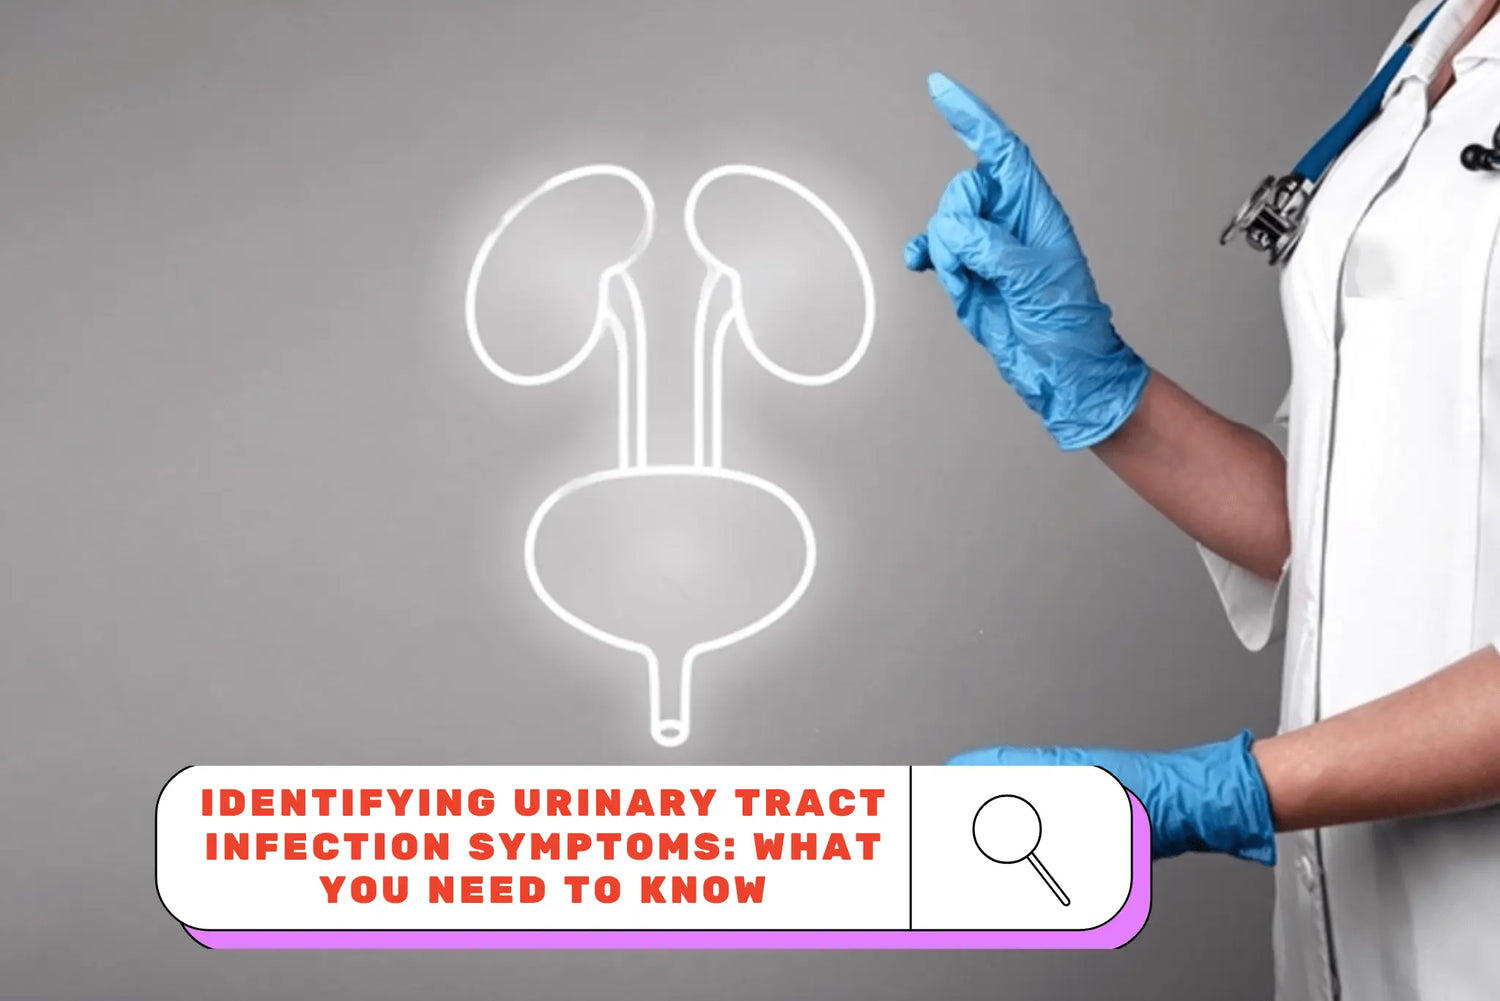 Identifying-Urinary-Tract-Infection-Symptoms-What-You-Need-to-Know Underleak